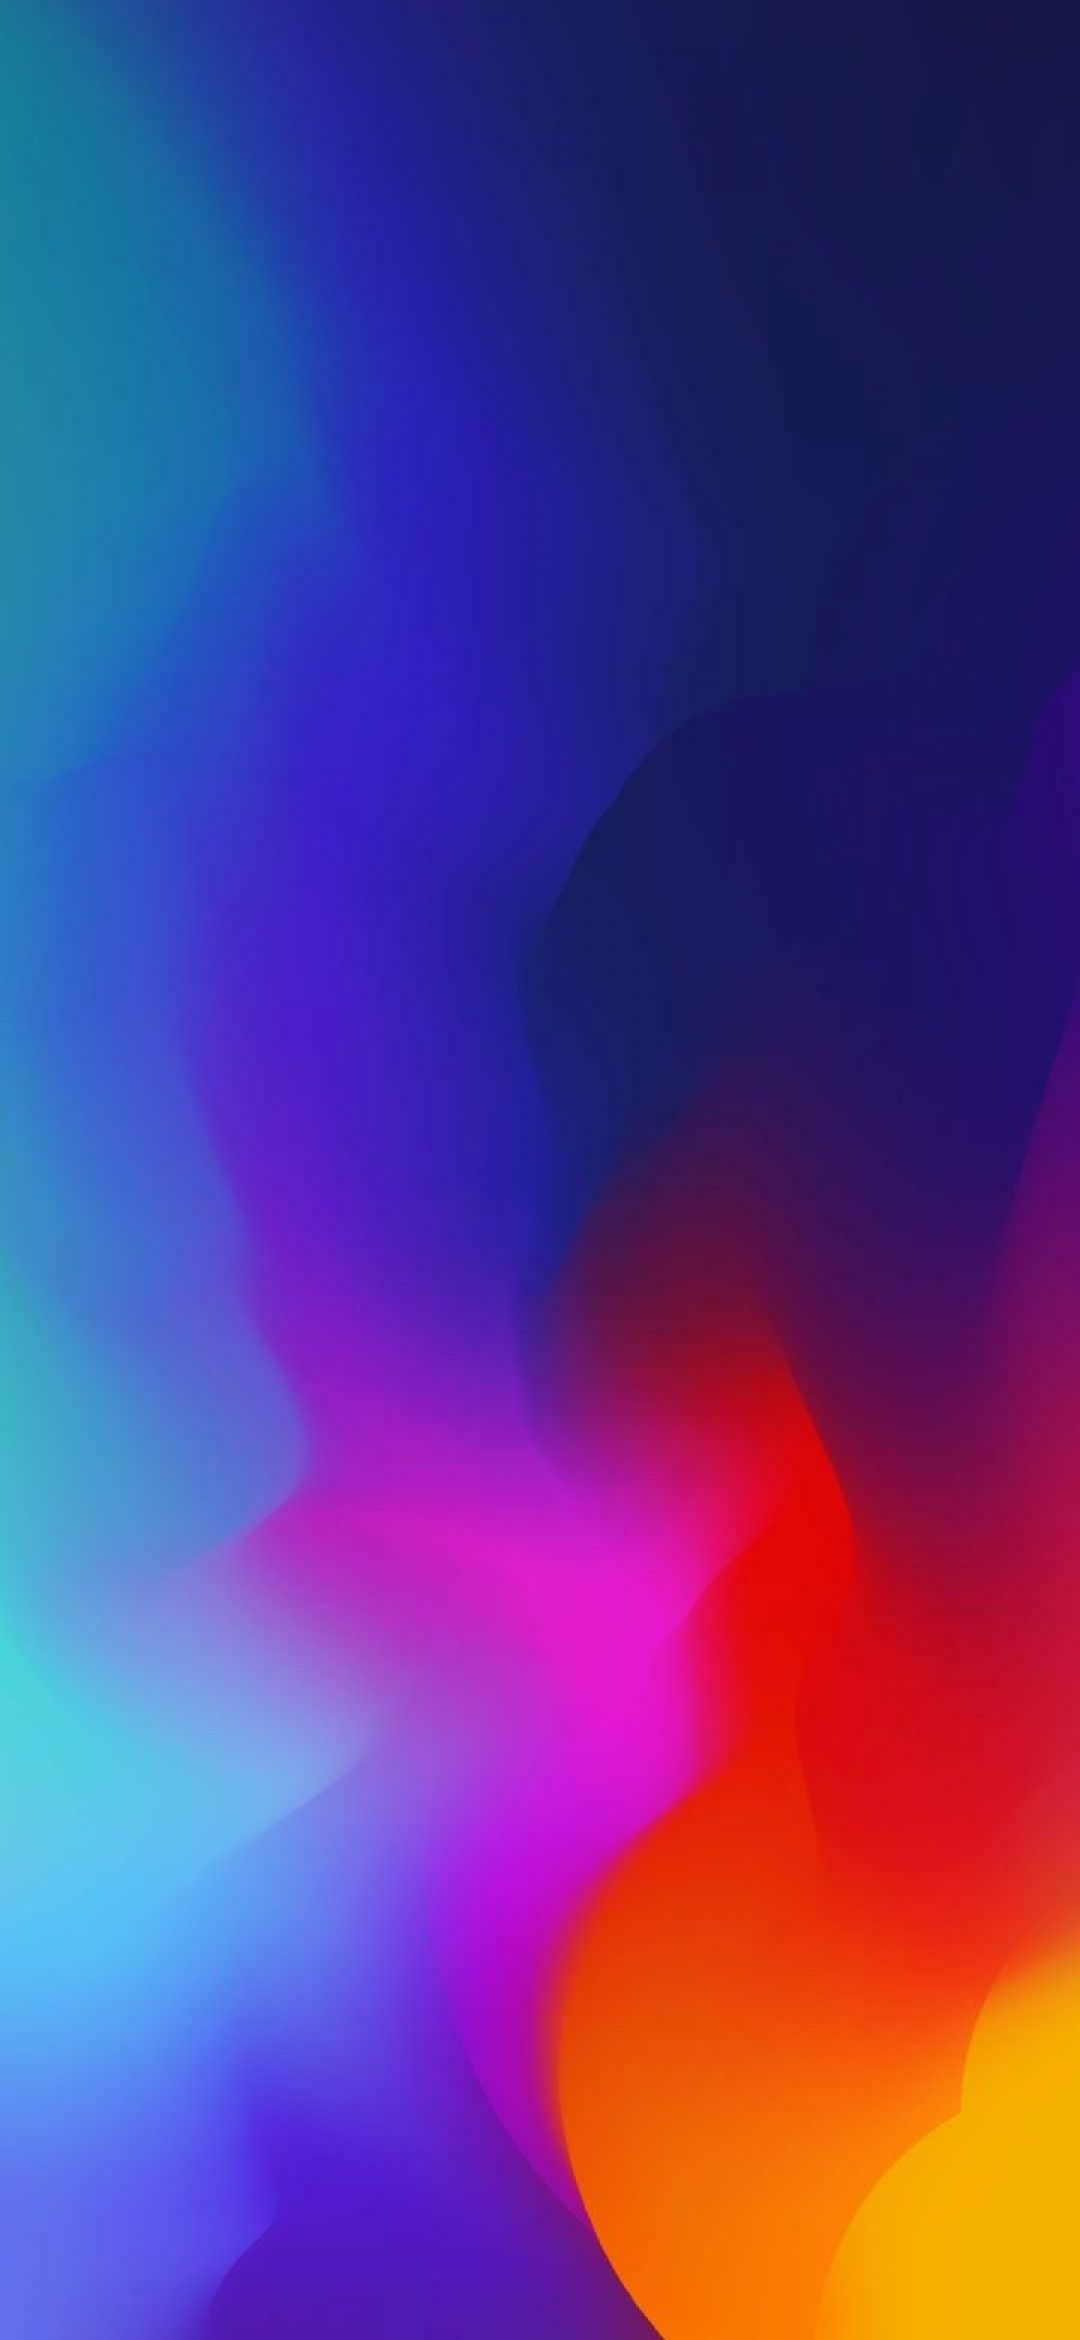 ✓[135+] Lenovo Z6 Youth Mobile Stock Wallpaper 02 - 720 x 1560 - Android /  iPhone HD Wallpaper Background Download (png / jpg) (2023)